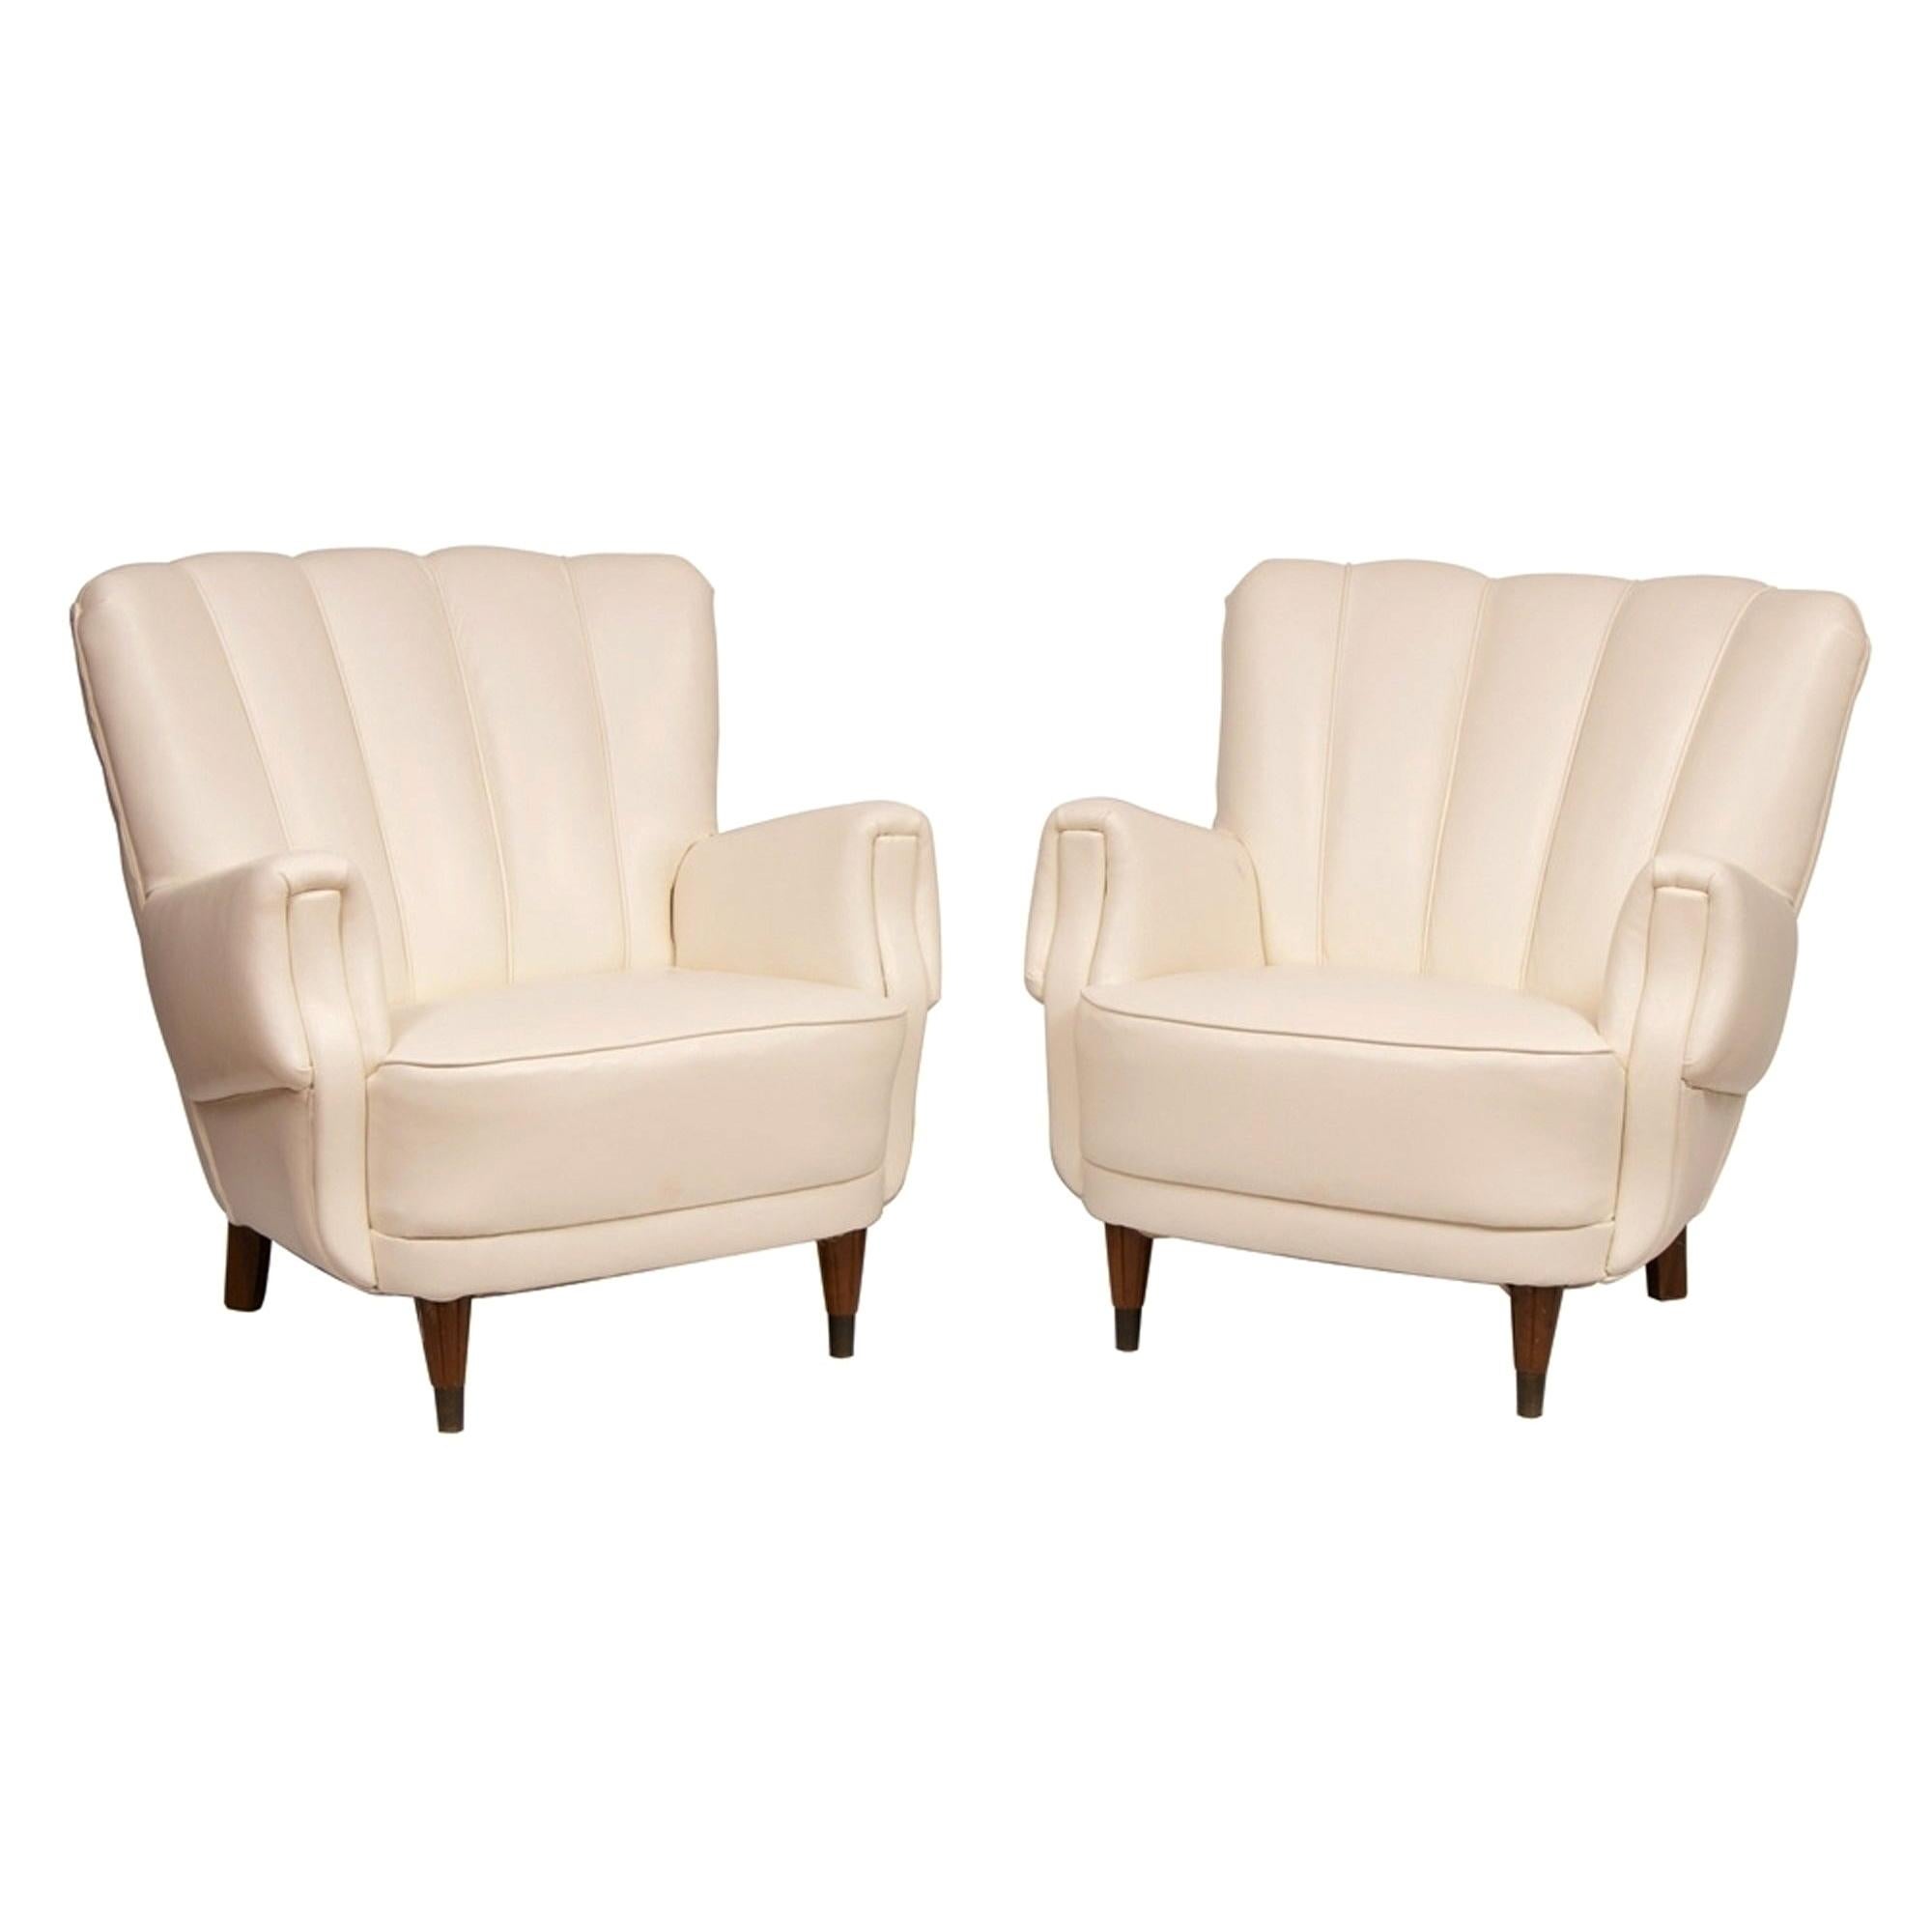 Pair of Art Deco Ivory Leather Armchairs, circa 1930